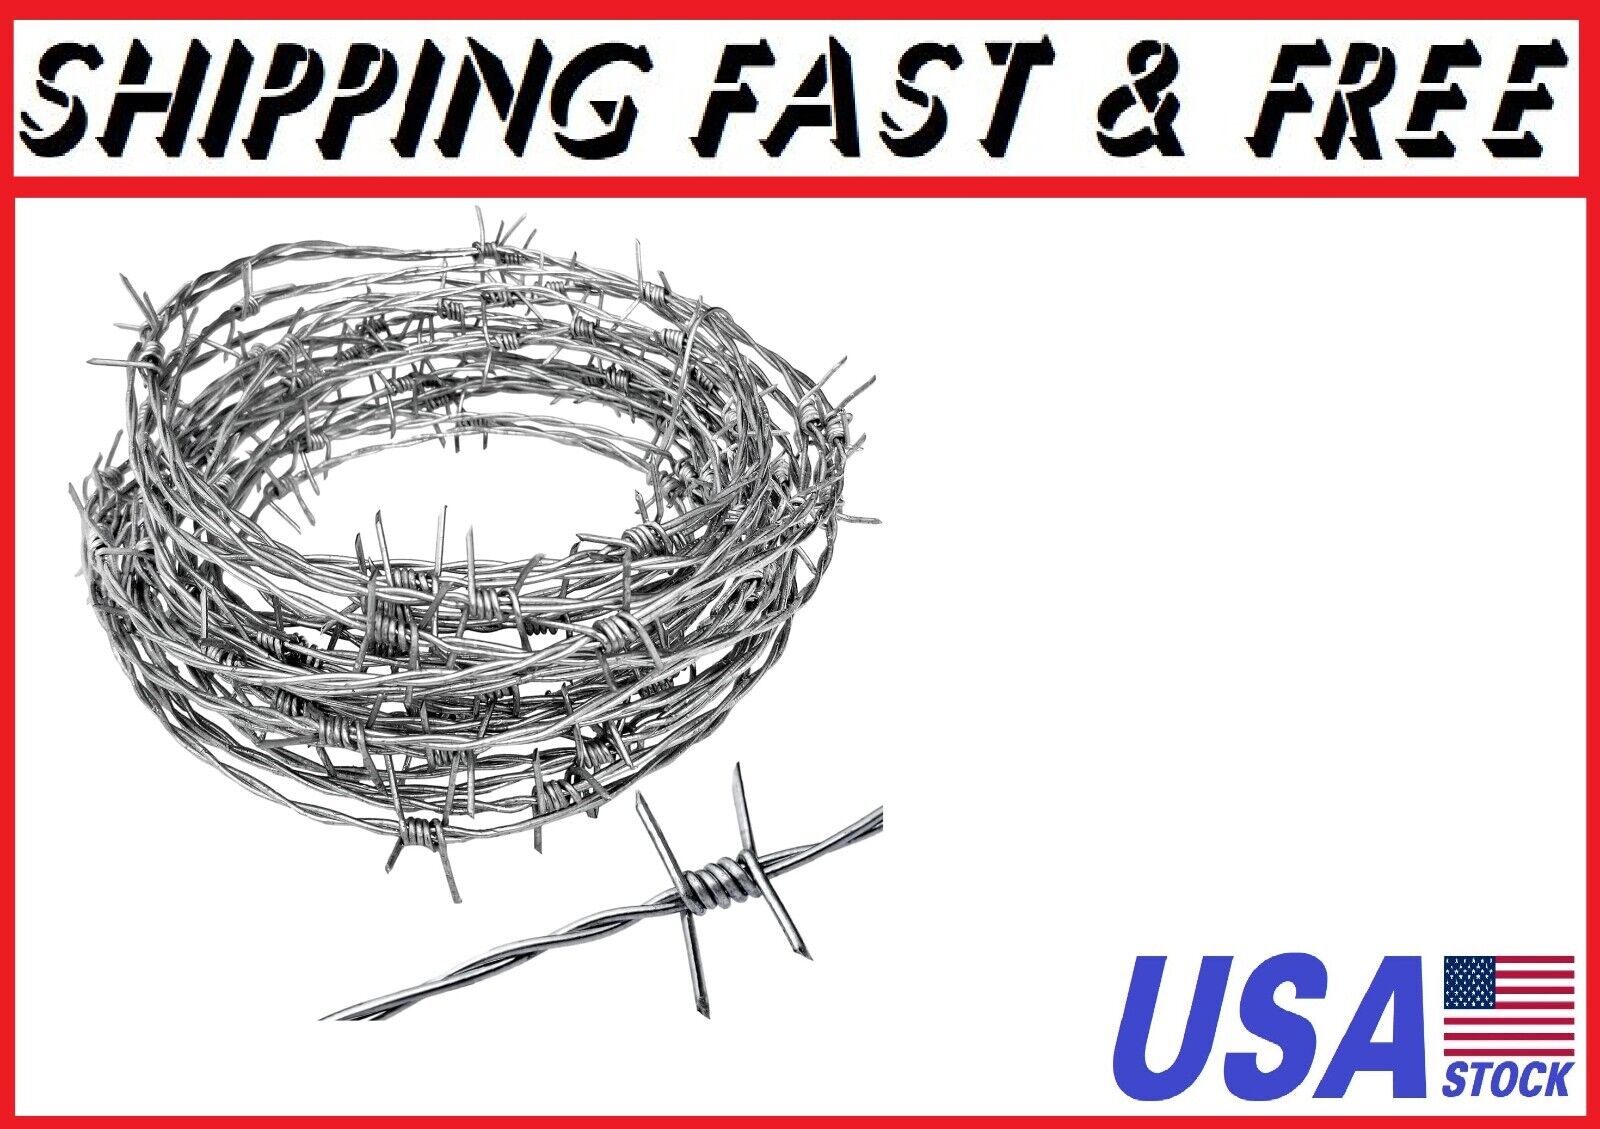 Real Barbed Wire 25ft 18 Gauge - Great for Crafts, Fences, and Critter Deterrent